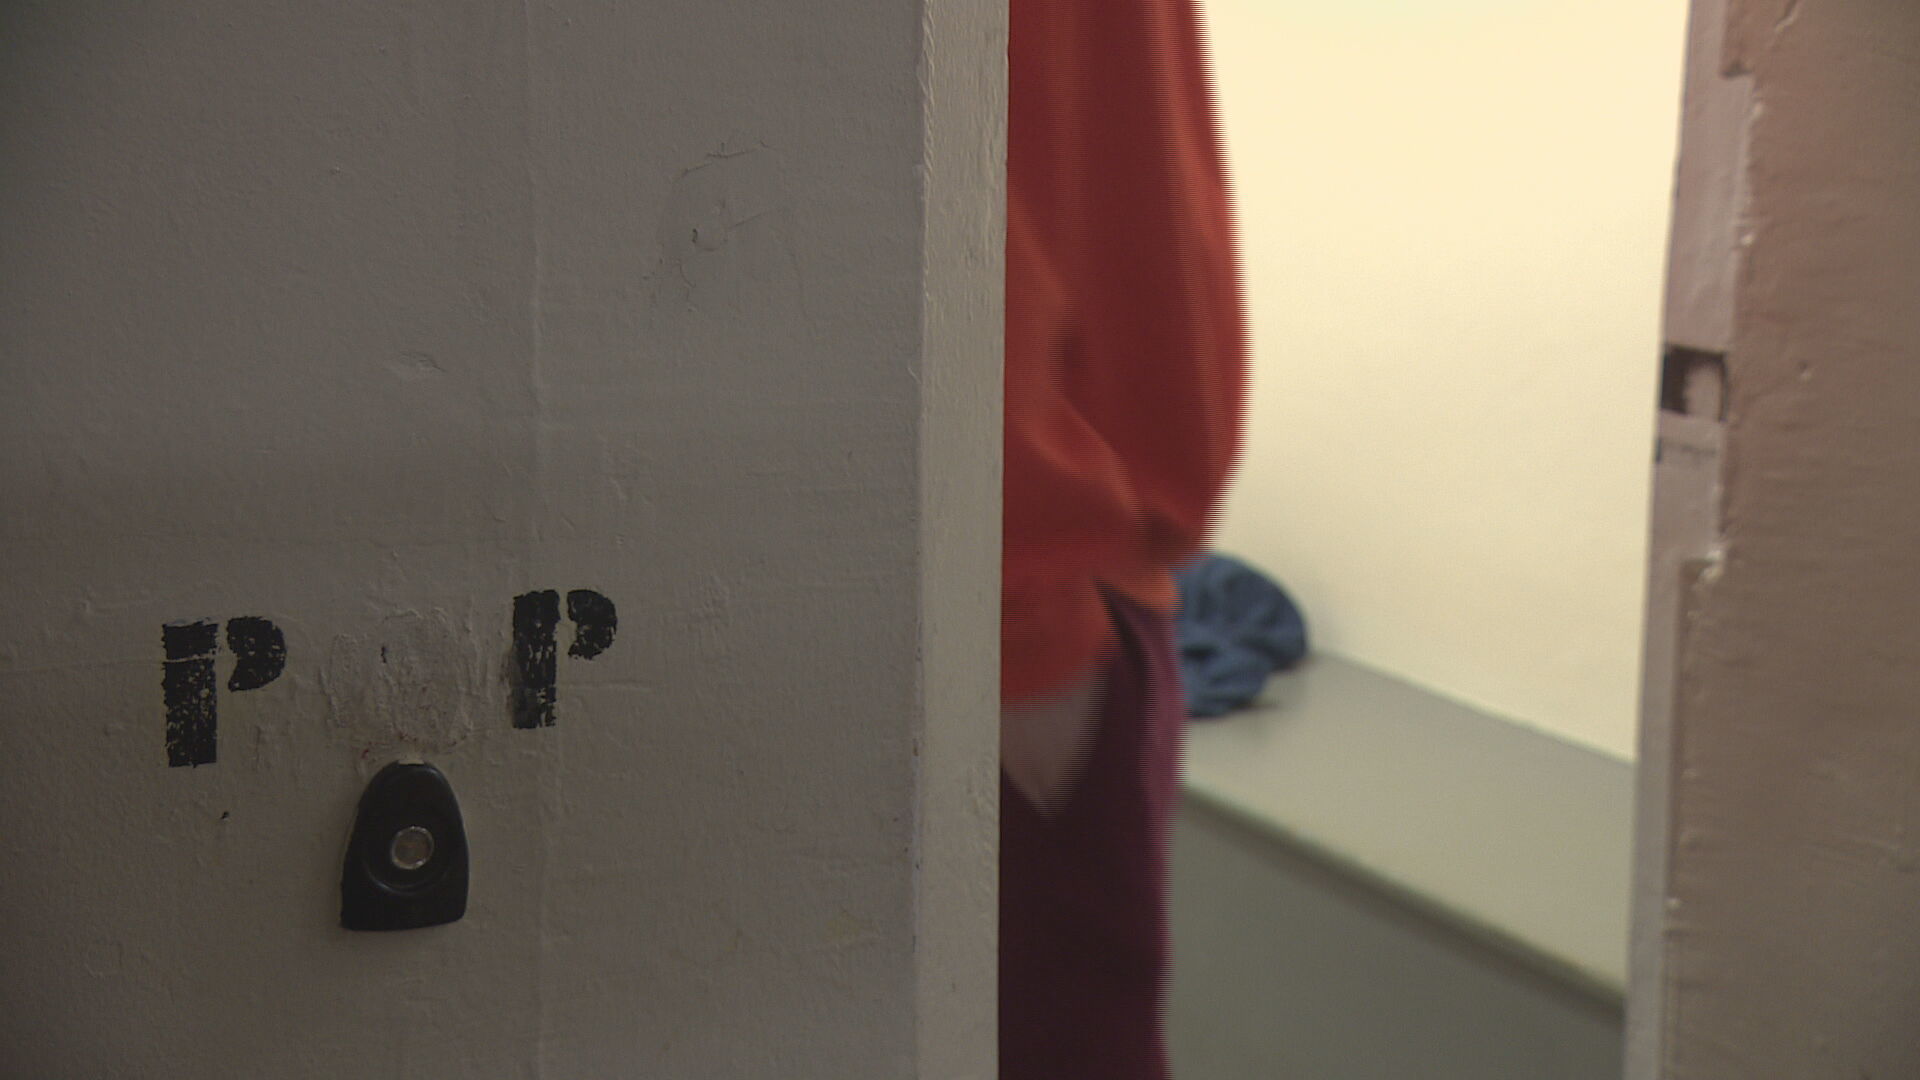 Overcrowding prisons 'raises anxieties and frustration,' SPS chief warns 